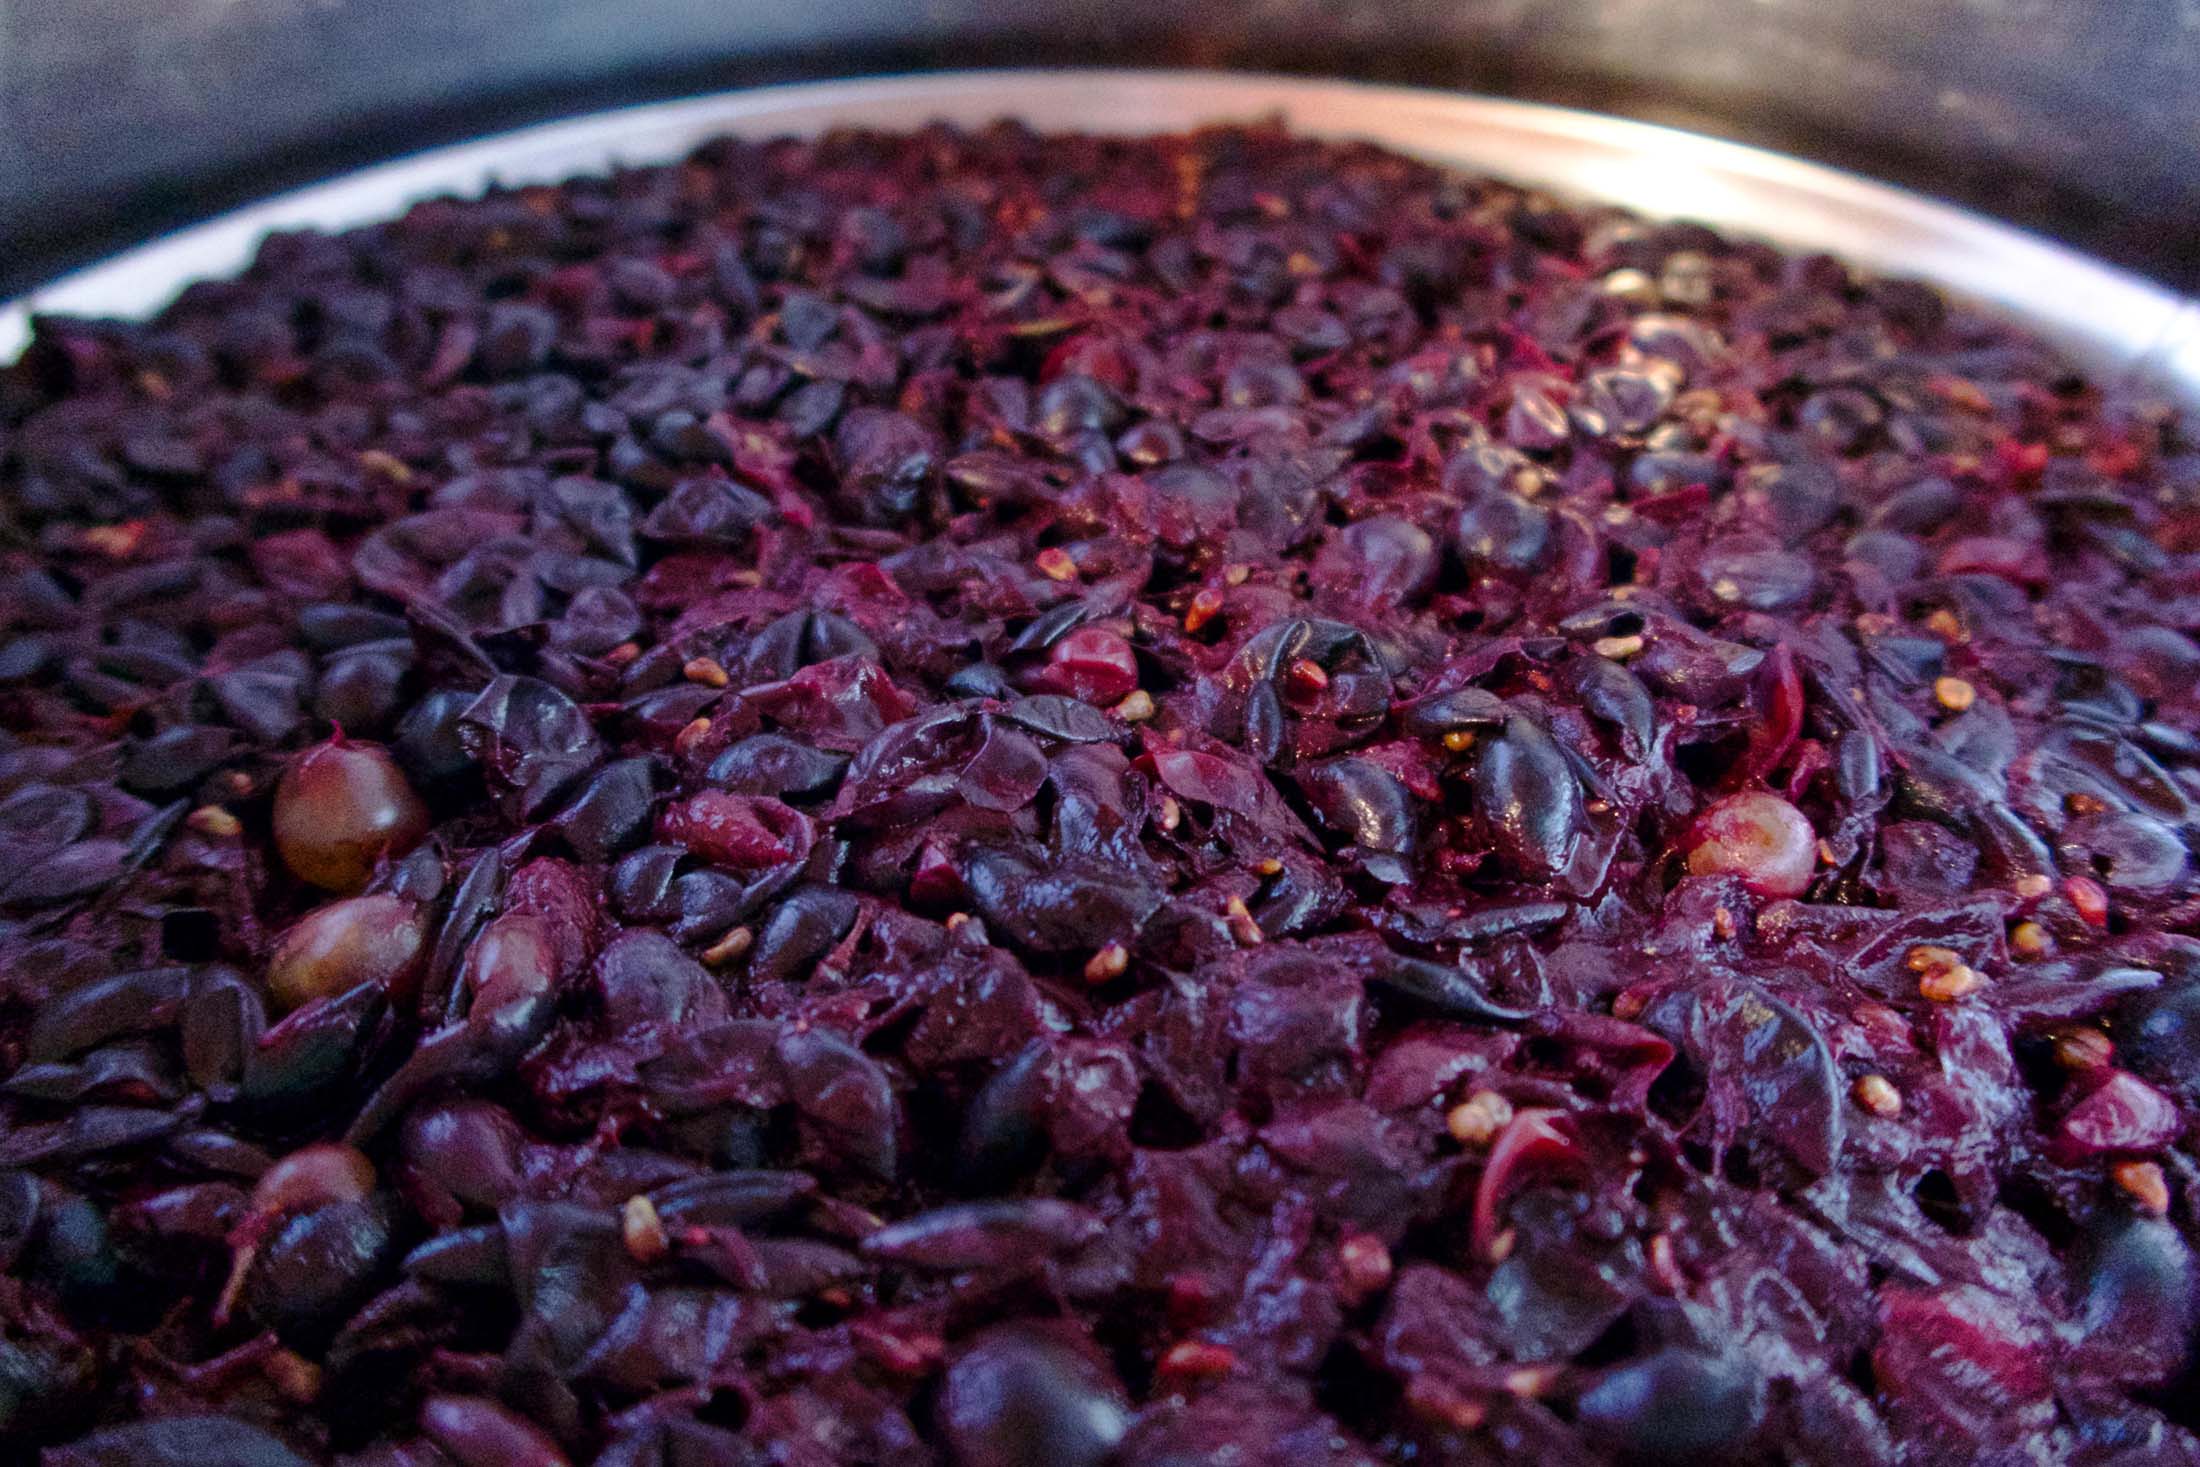 A natural wine Hugo is fermenting for future beer blends